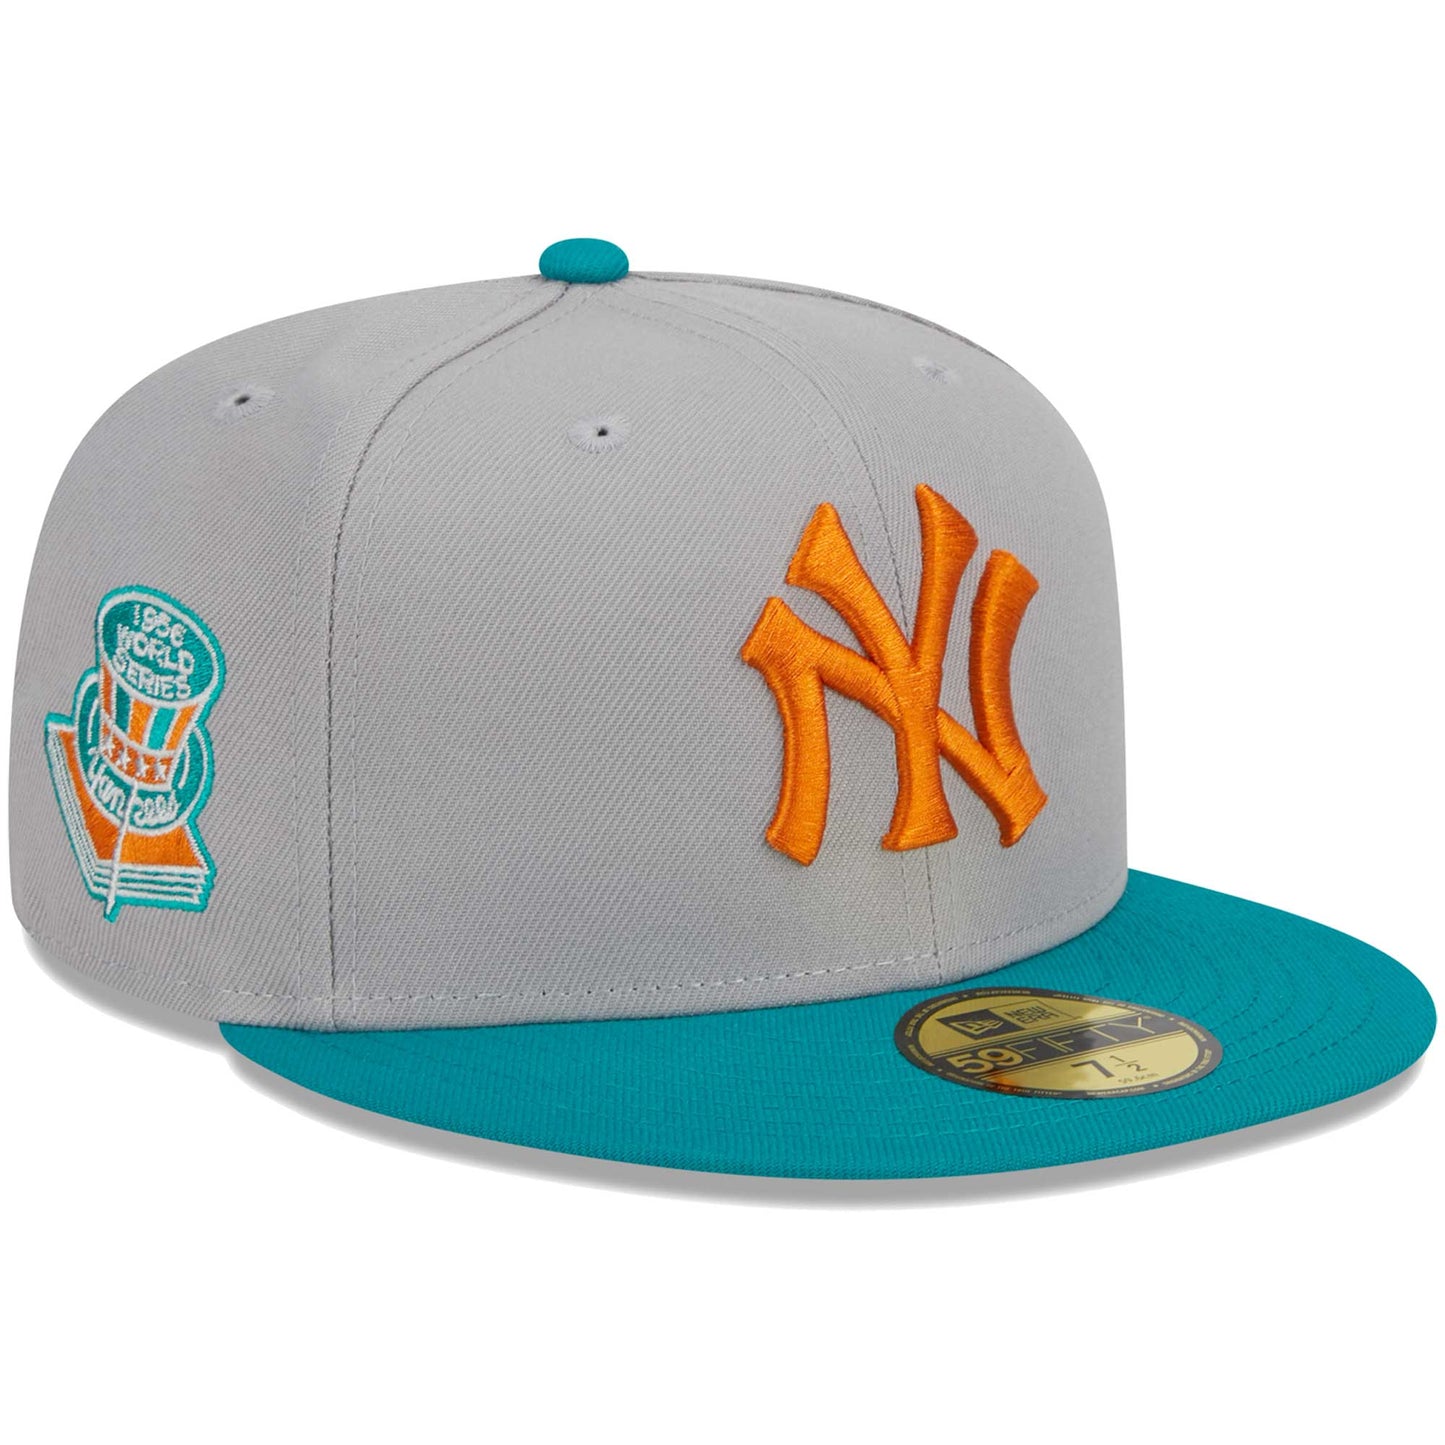 New York Yankees New Era 59FIFTY Fitted Hat - Gray/Teal